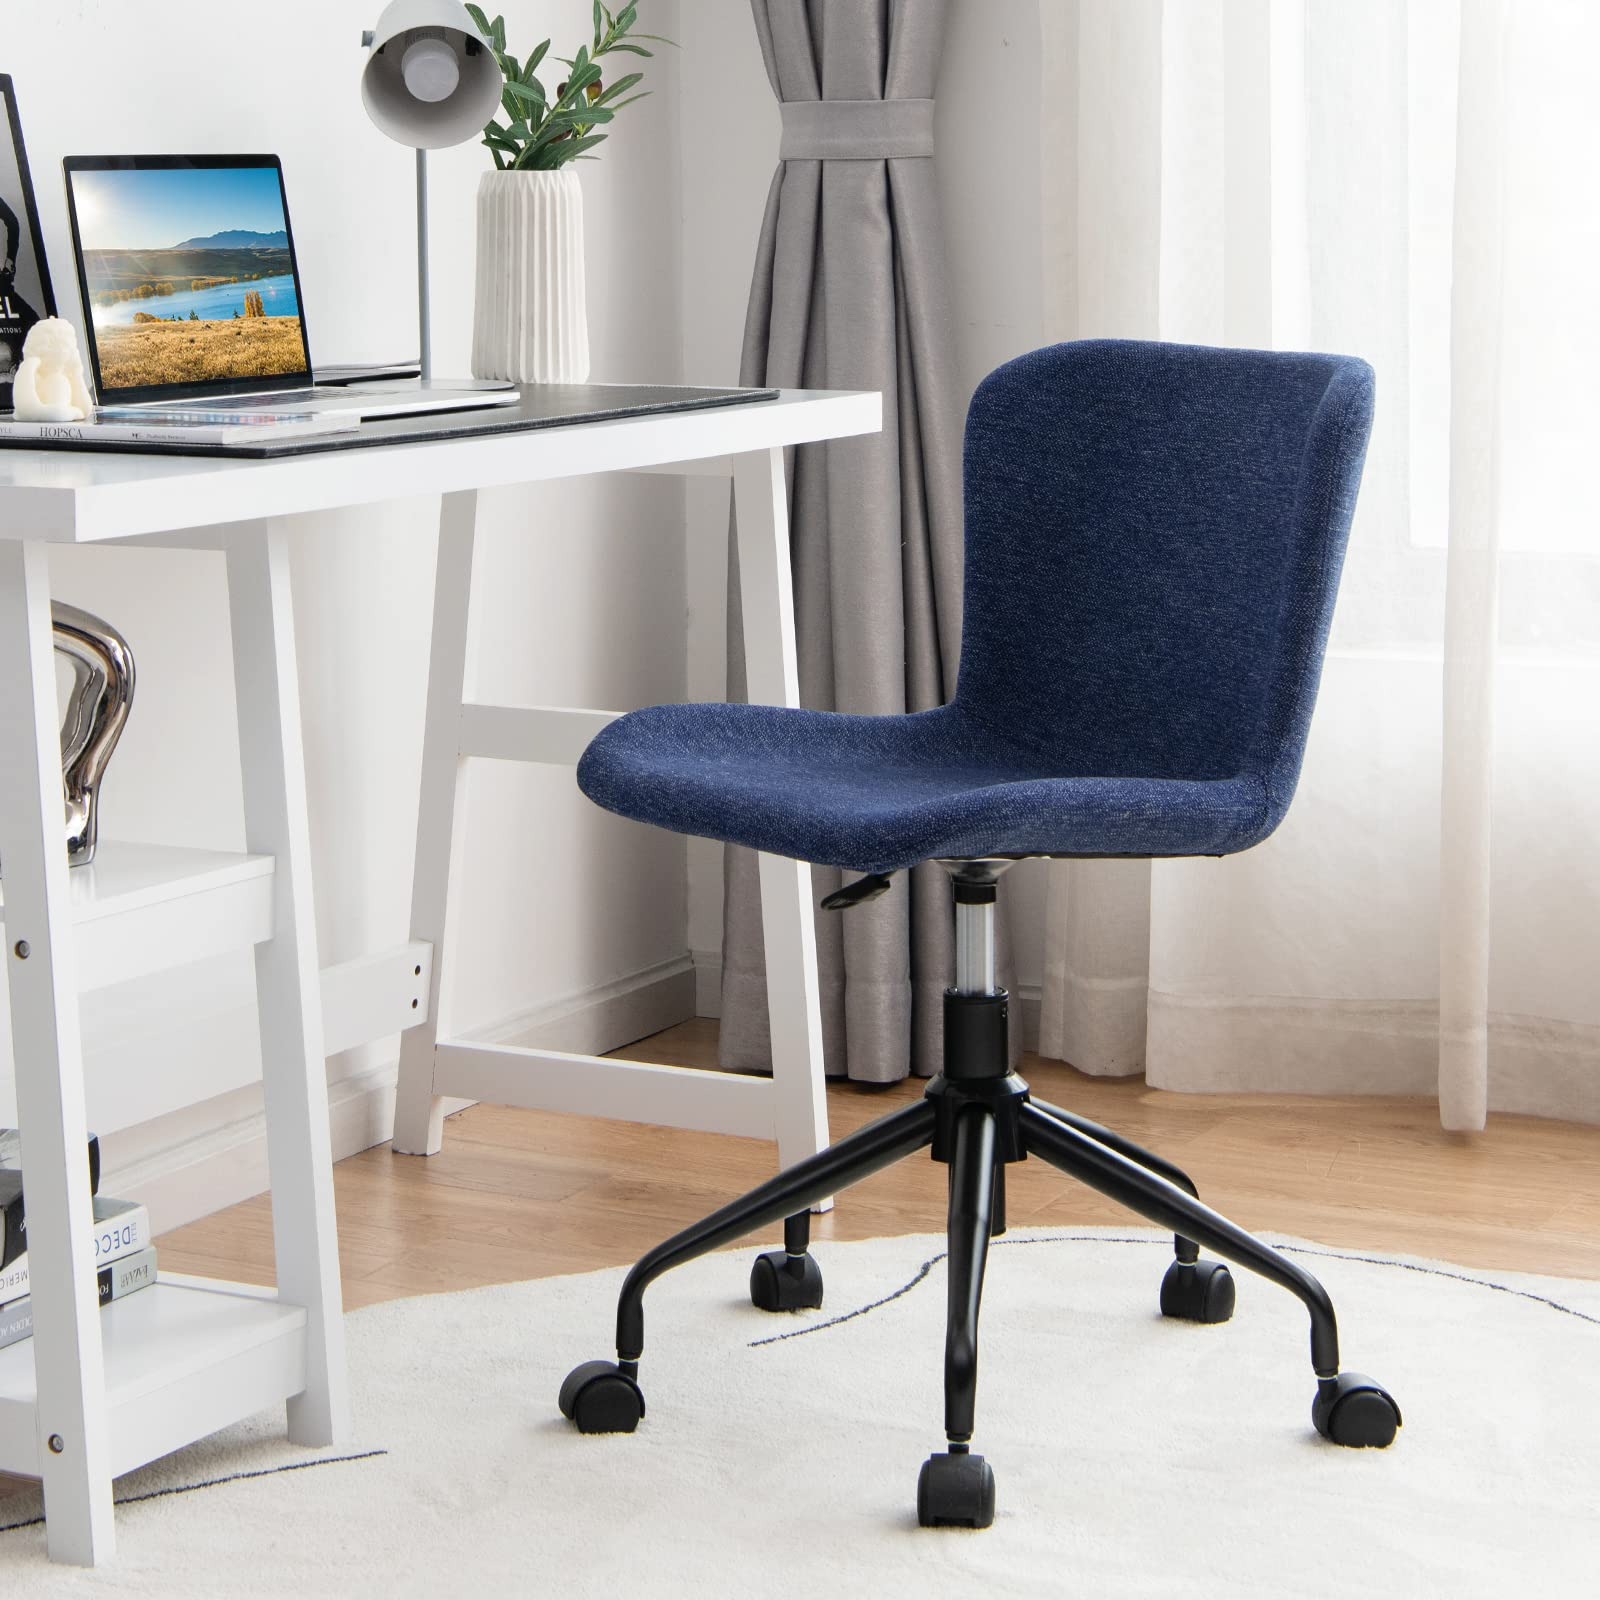 Giantex Home Office Chair with Wheels, Mid-Back Swivel Computer Chair Rolling Adjustable Linen Leisure Chair